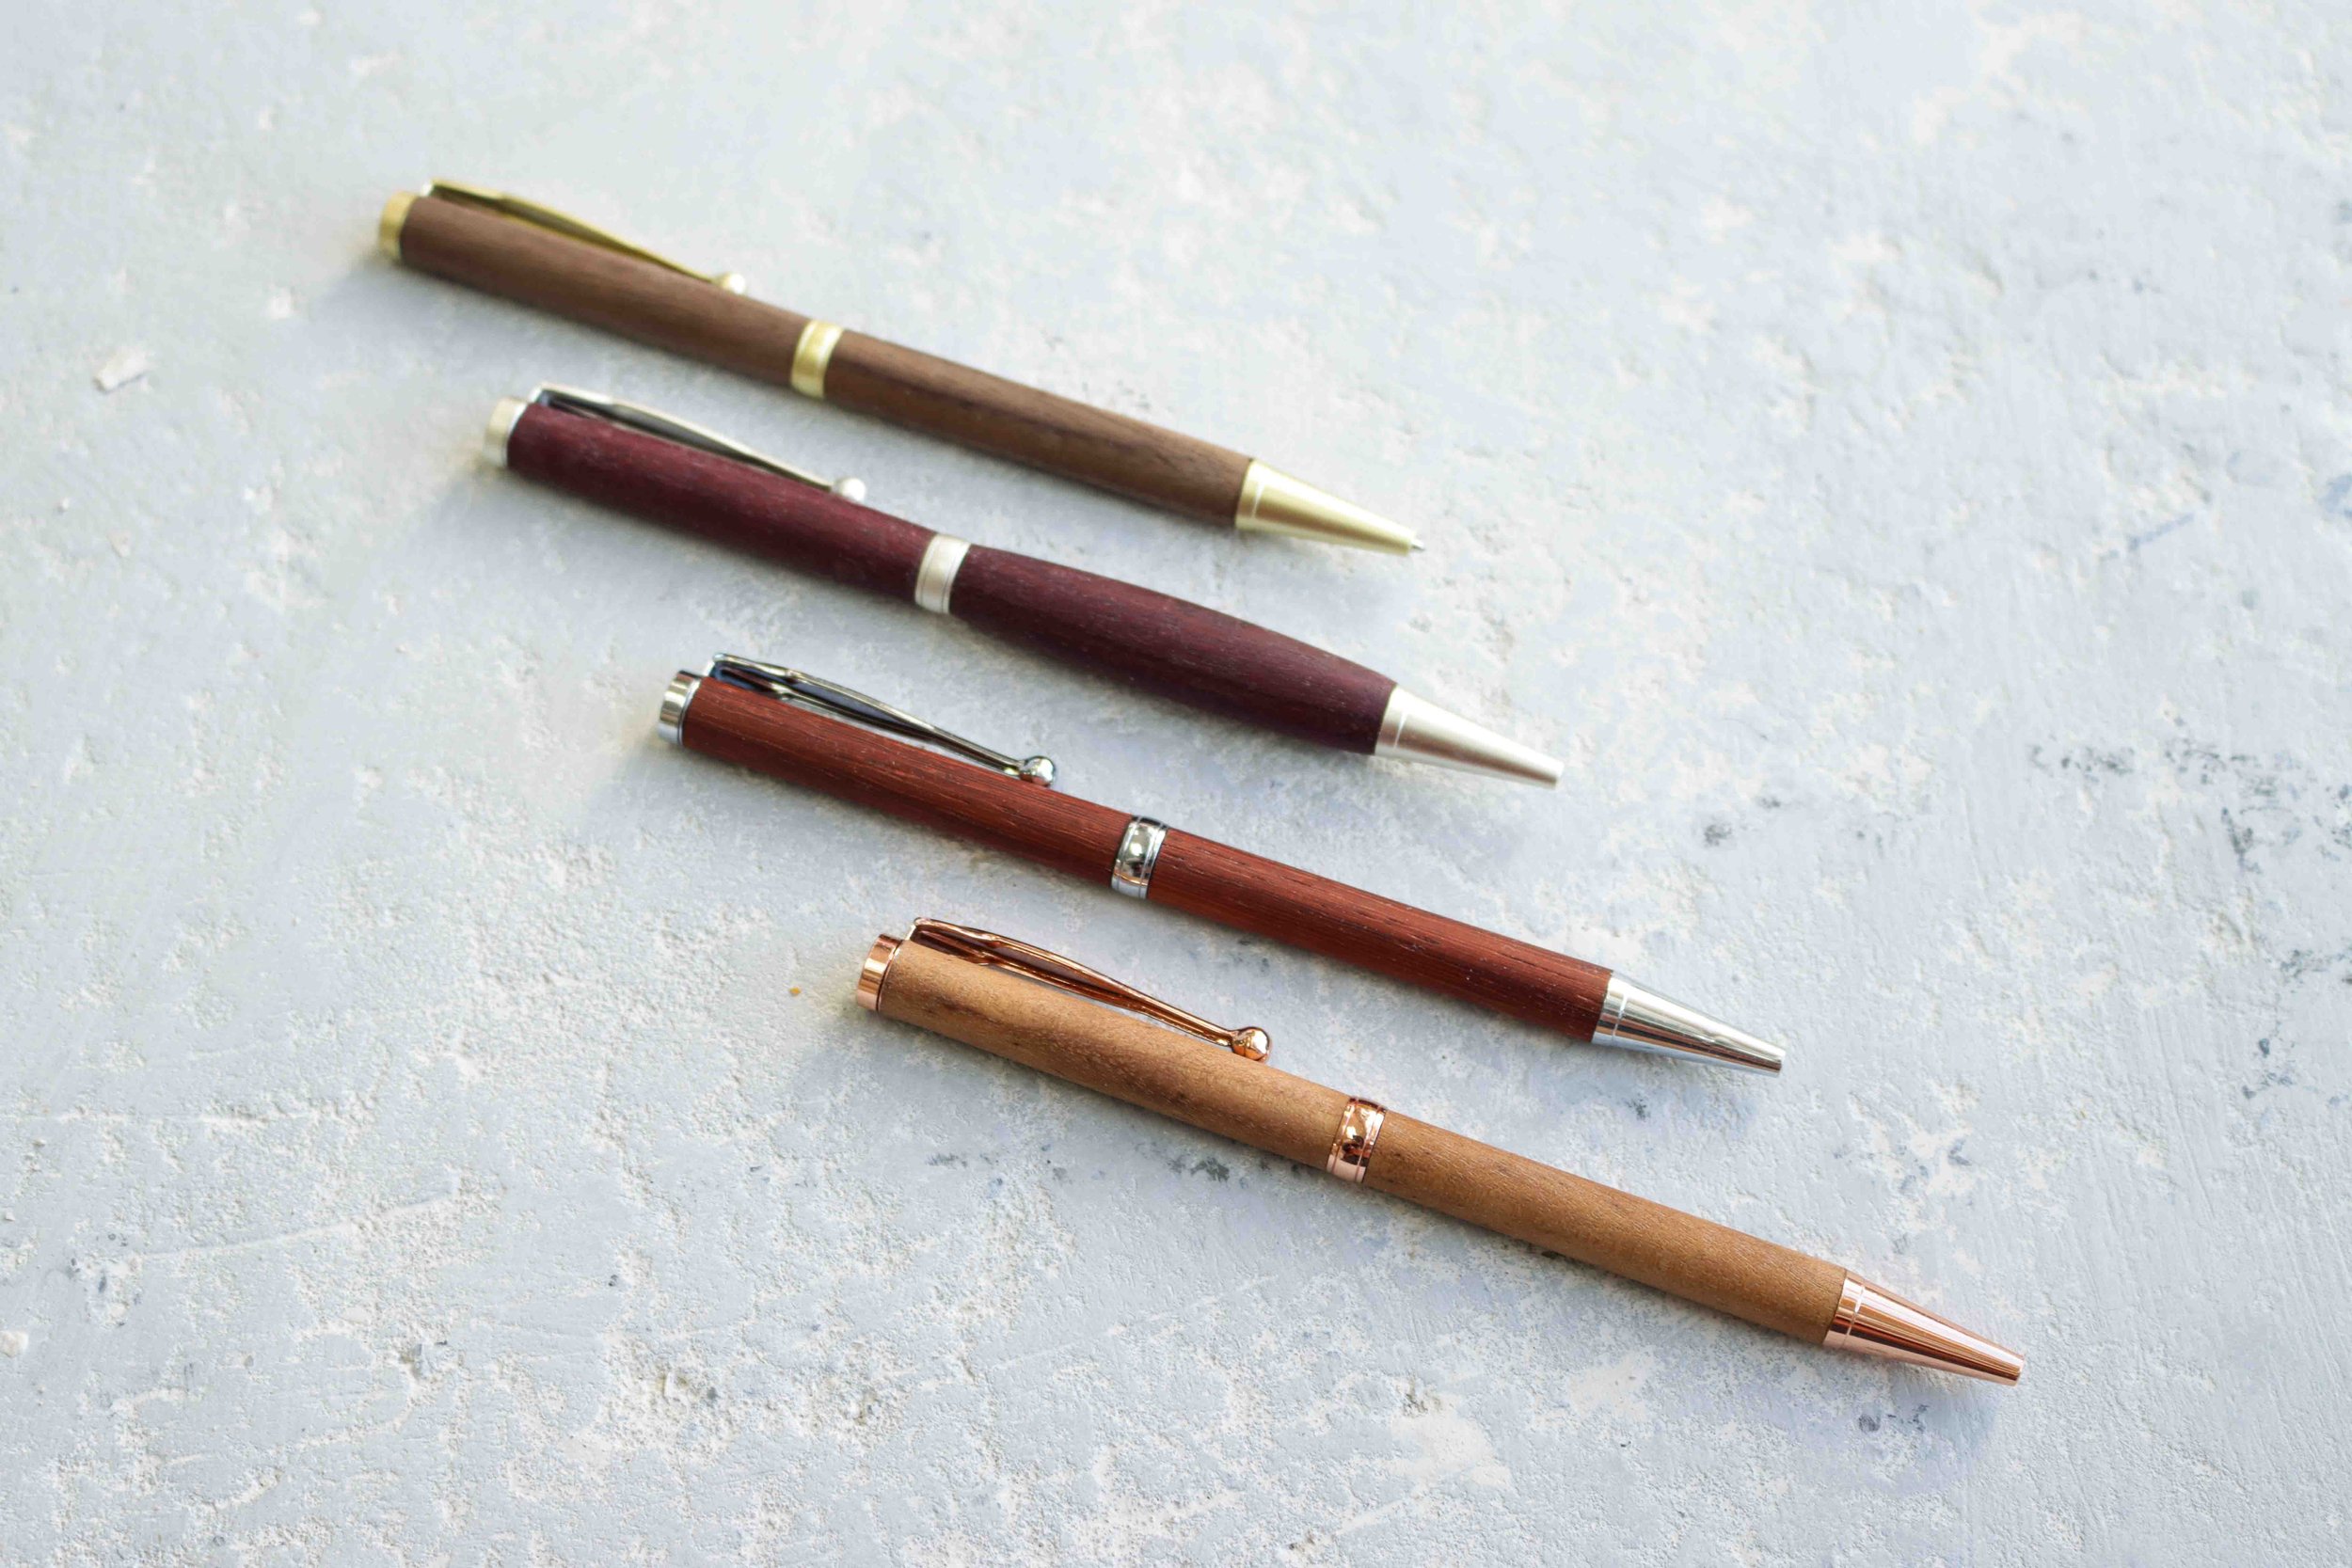 Wooden pencils turned on the lathe (Copy) (Copy) (Copy) (Copy) (Copy) (Copy) (Copy) (Copy)